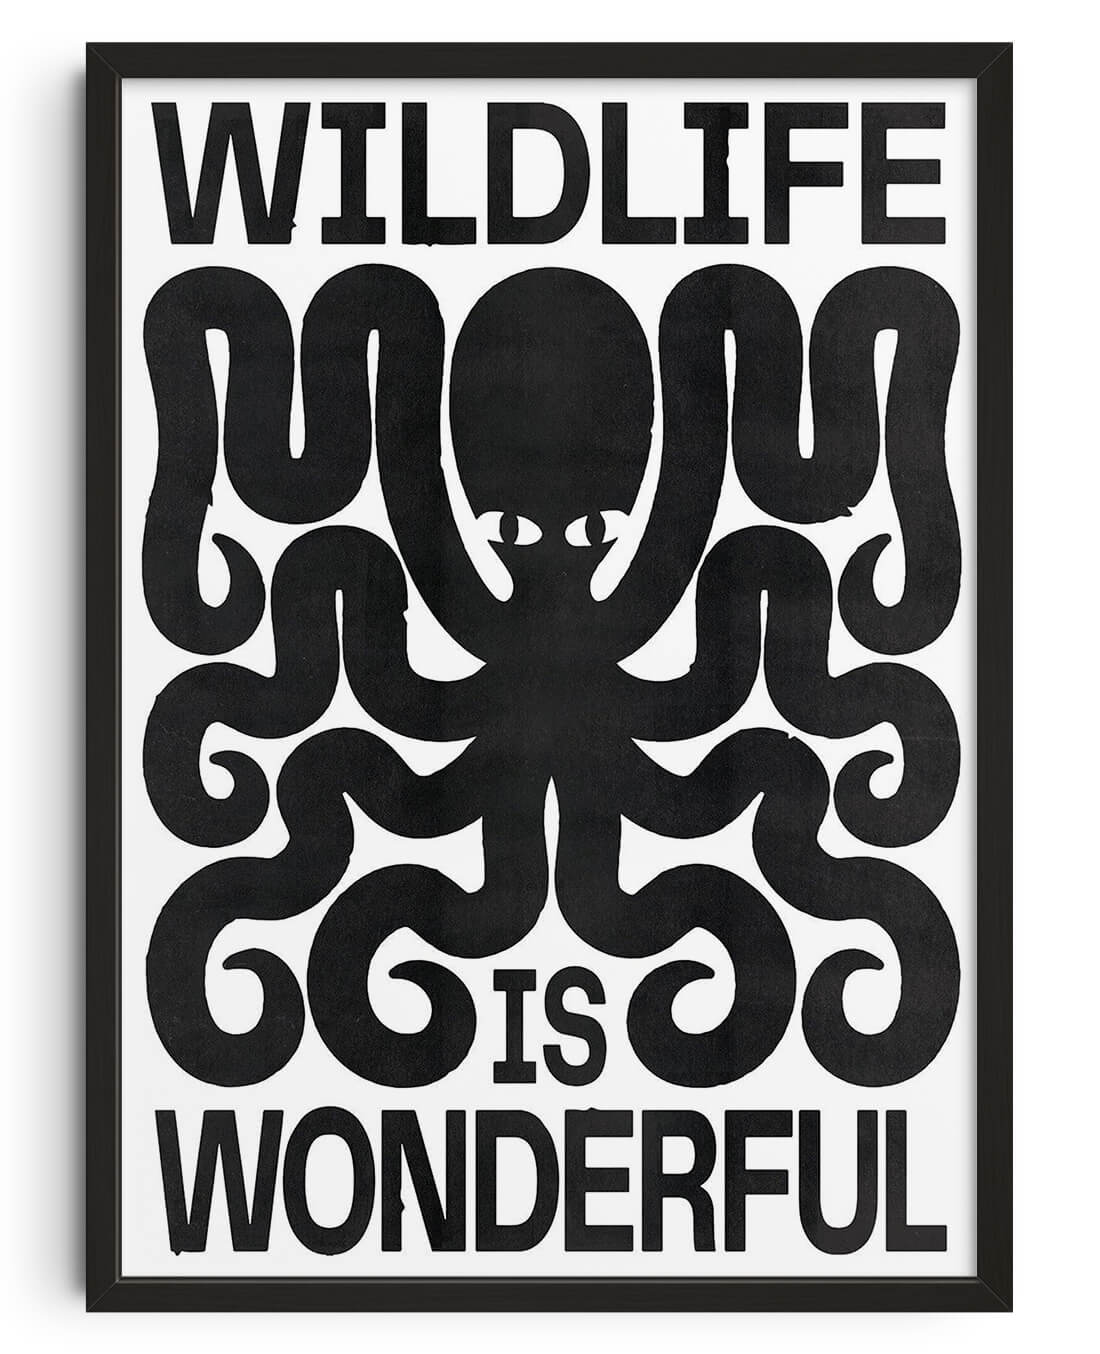 Wildlife contemporary wall art print by Alexander Khabbazi - sold by DROOL